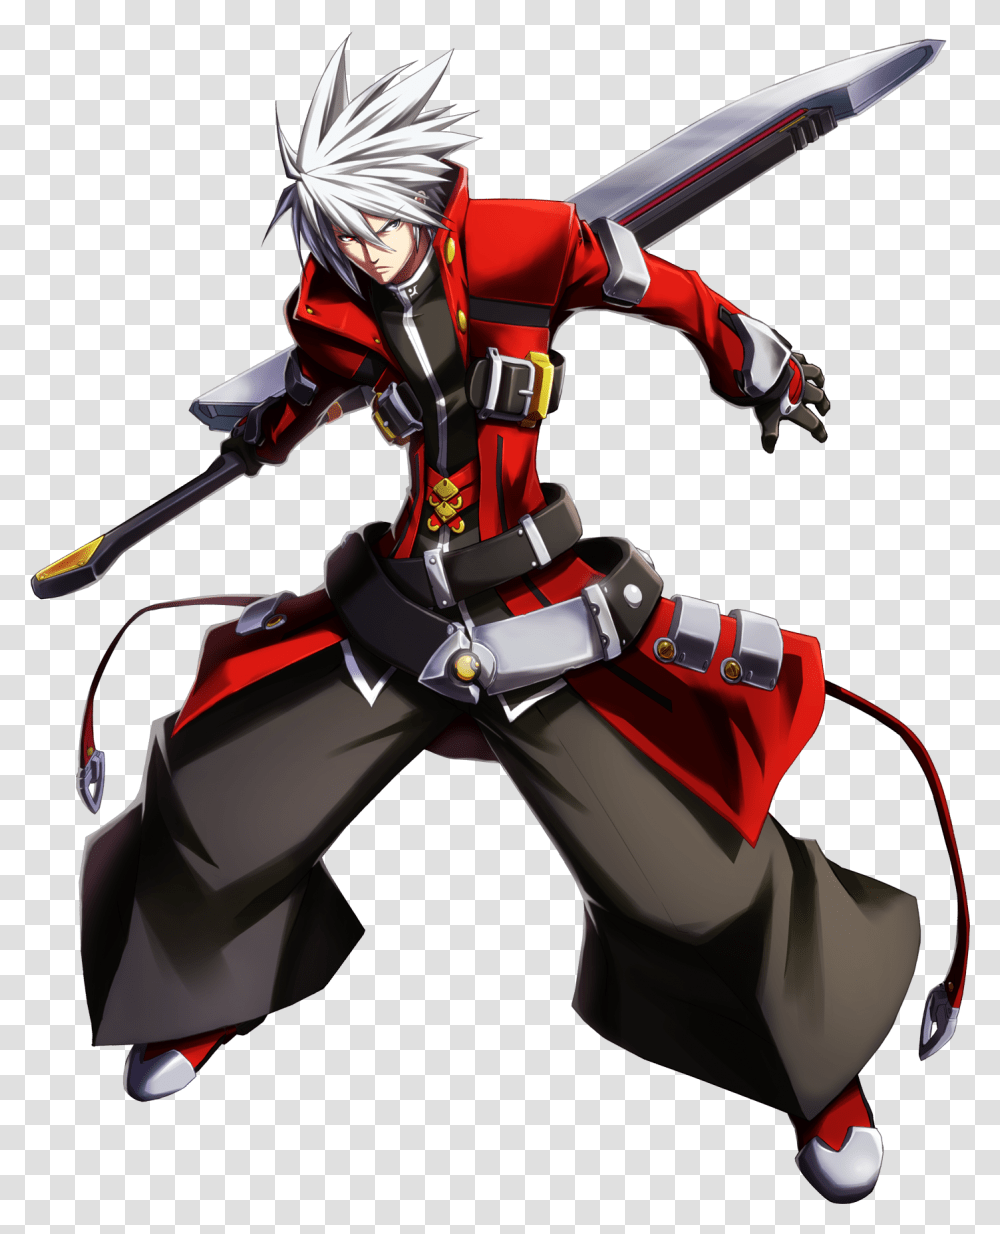 Blazblue Blazbluepng Images Pluspng Anime Video Game Characters, Samurai, Ninja, Toy Transparent Png